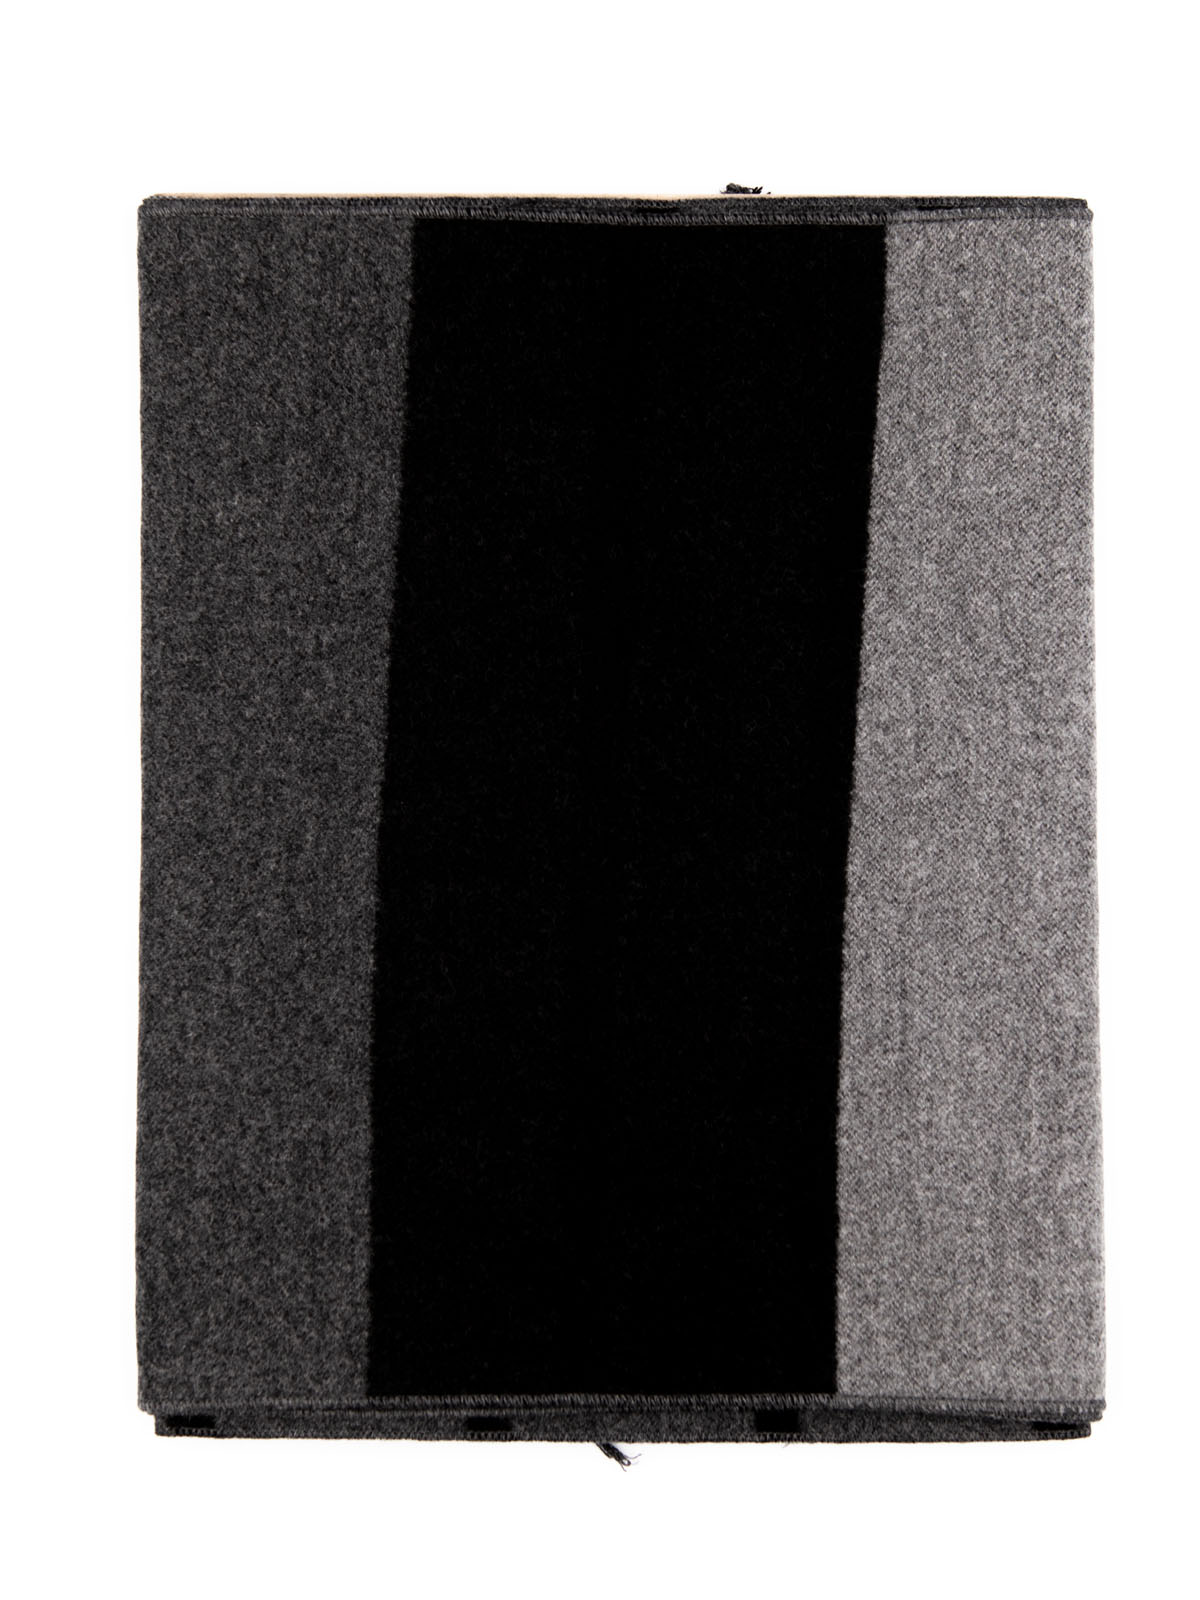  classic scarf in gray and black  - 10351 - € 19.68 img2